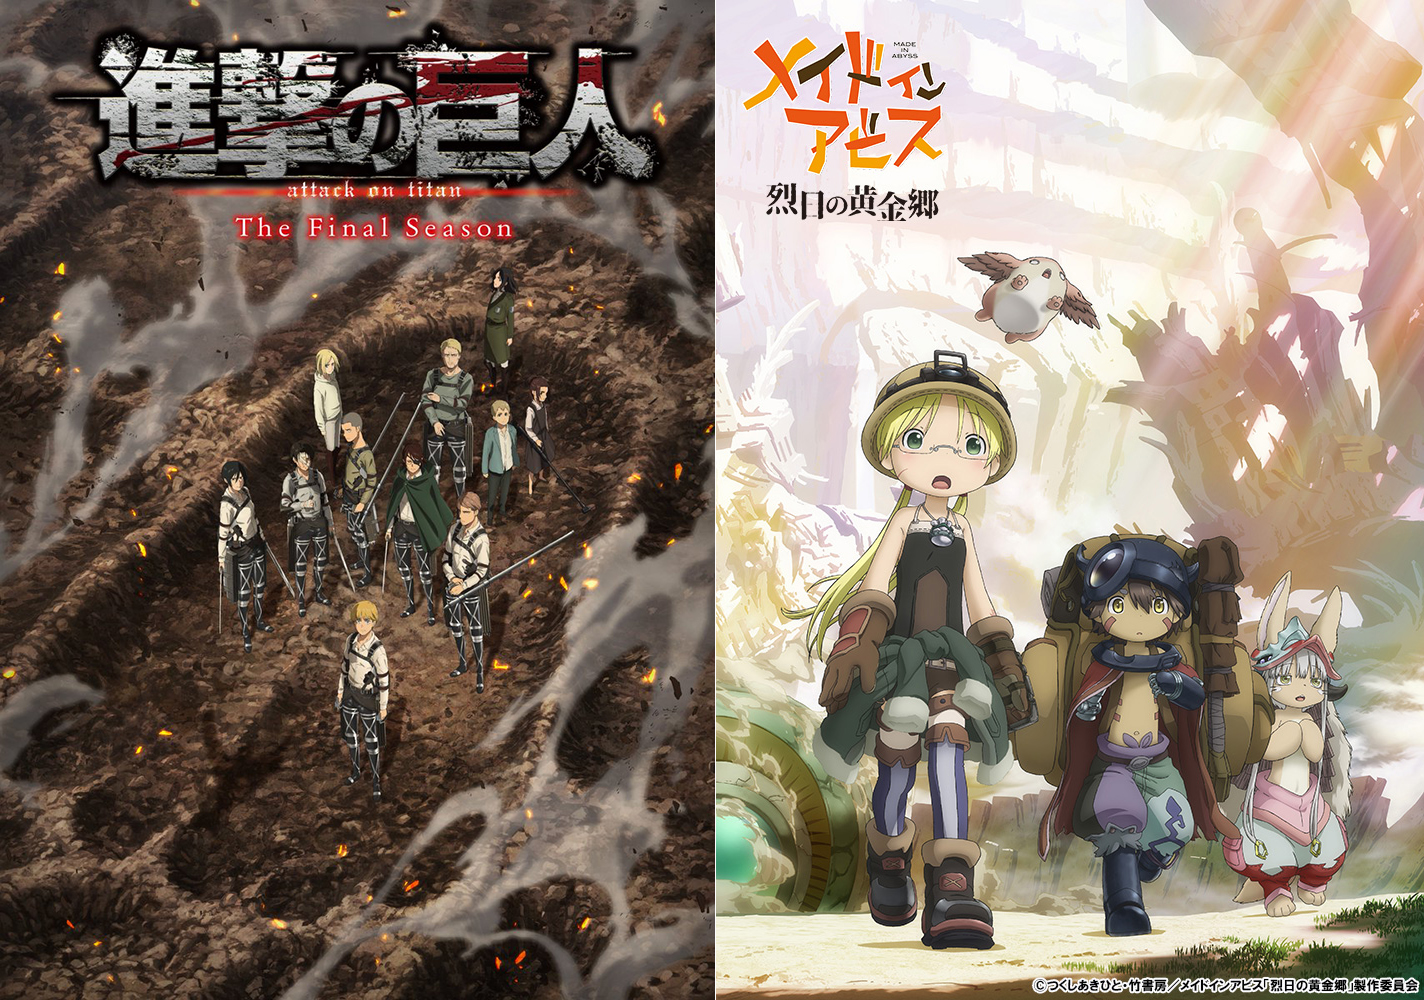 Made in Abyss Season 2 scheduled for July 2022, Attack on Titan: The Final  Season Part 3 in 2023 - Toonami Squad